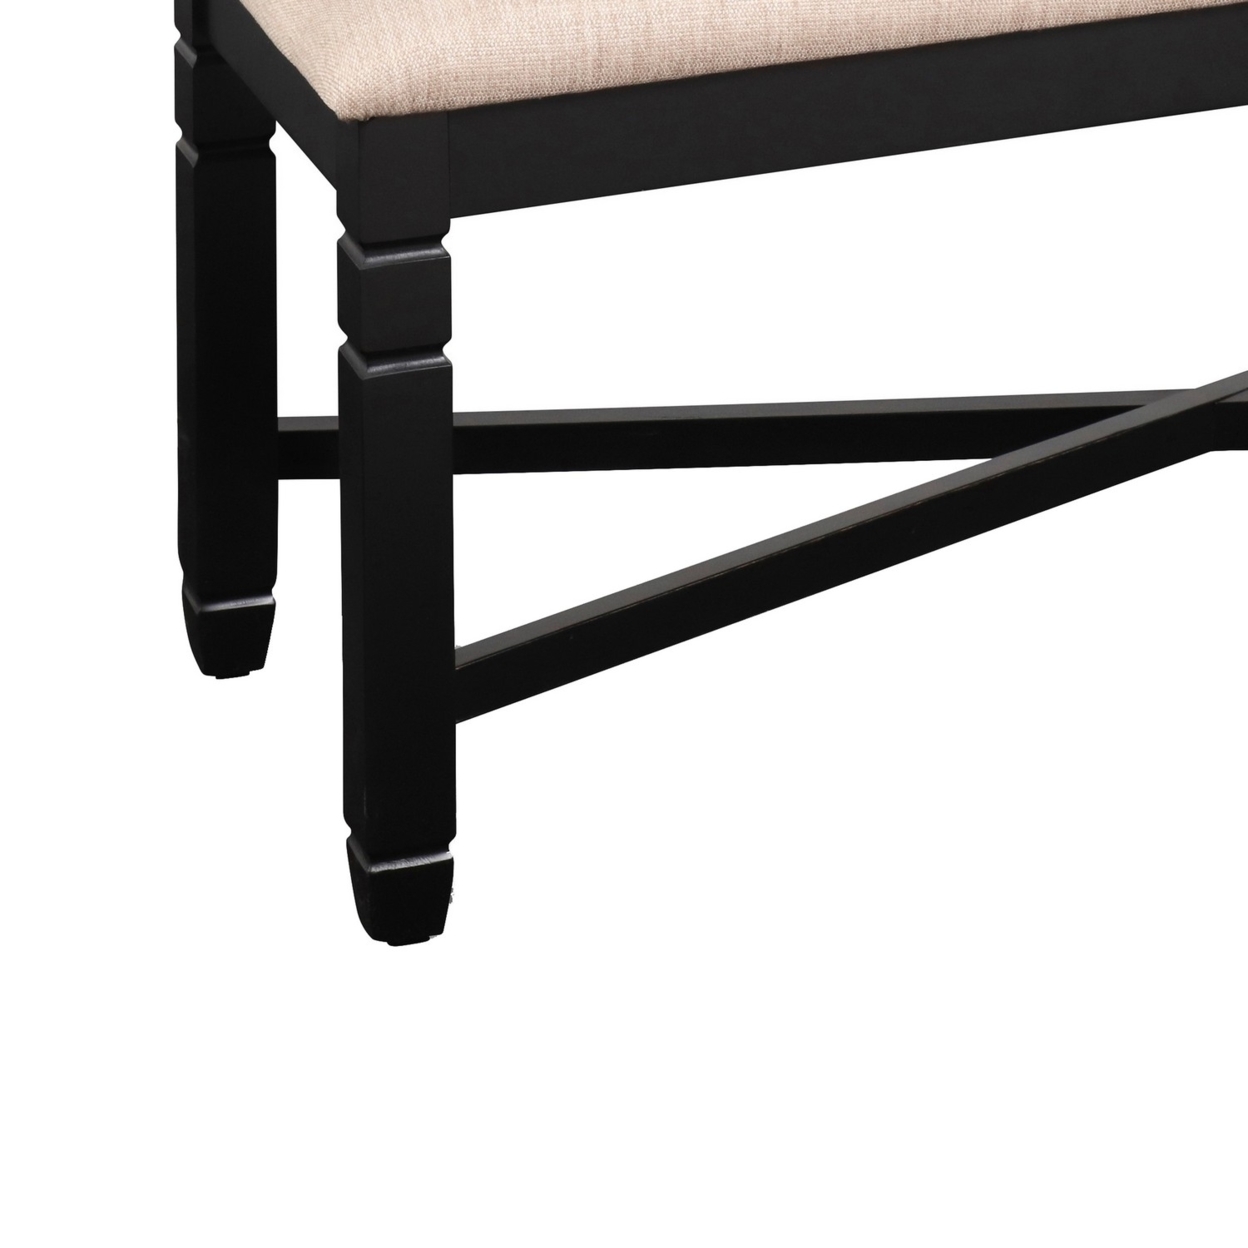 Fabric Dining Bench With Turned Legs And X Shaped Support, Beige And Black- Saltoro Sherpi